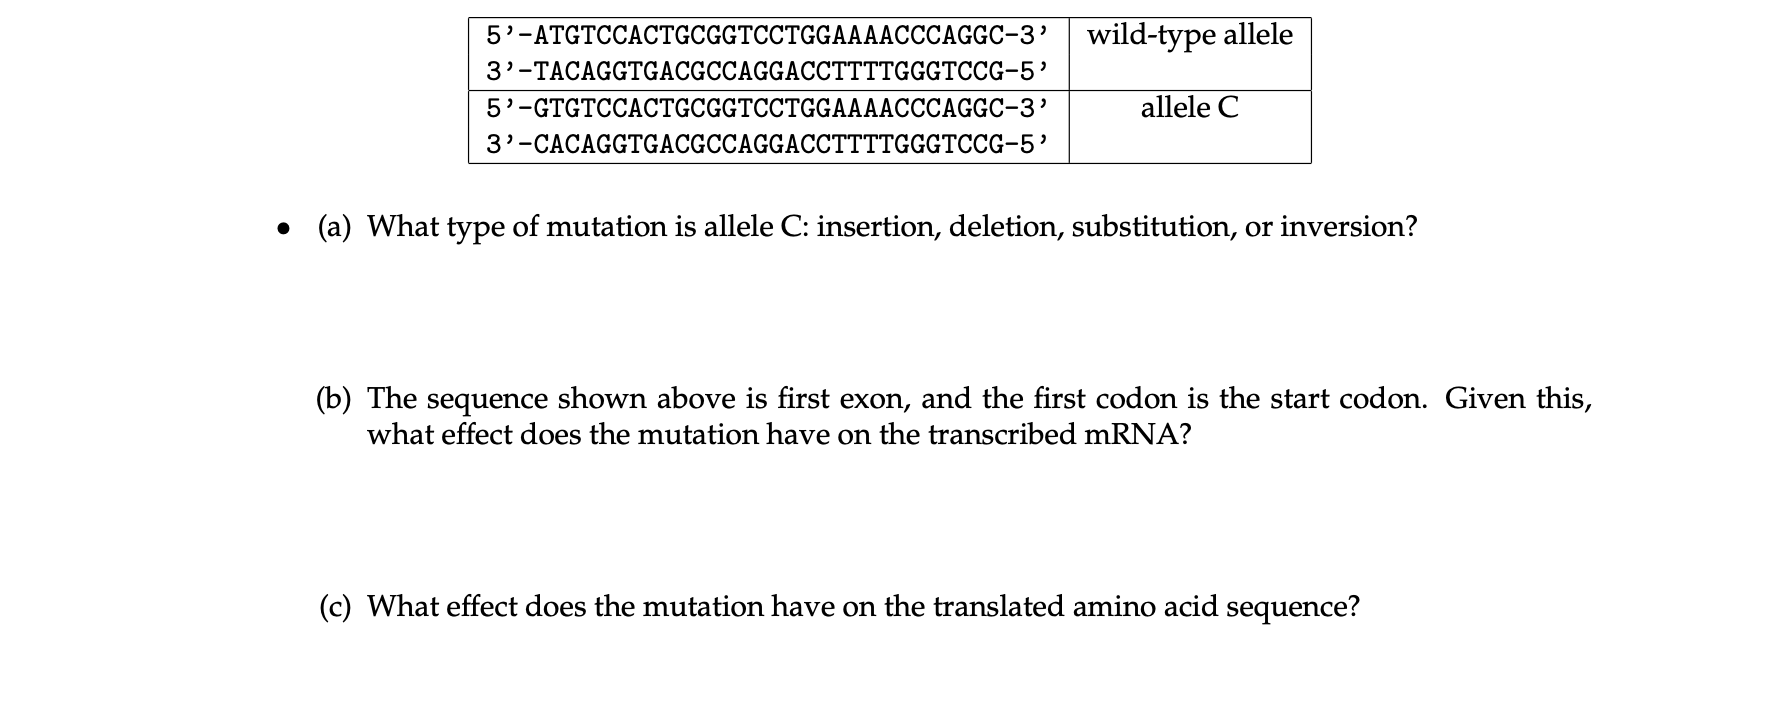 5'-ATGTCCACTGCGGTCCTGGAAAACCCAGGC-3’
wild-type allele
3'-TACAGGTGACGCCAGGACCTTTTGGGTCCG-5’
5'-GTGTCCACTGCGGTCCTGGAAAACCCAGGC-3’
allele C
3'-CACAGGTGACGCCAGGACCTTTTGGGTCCG-5’
• (a) What type of mutation is allele C: insertion, deletion, substitution, or inversion?
(b) The sequence shown above is first exon, and the first codon is the start codon. Given
what effect does the mutation have on the transcribed mRNA?
(c) What effect does the mutation have on the translated amino acid sequence?
